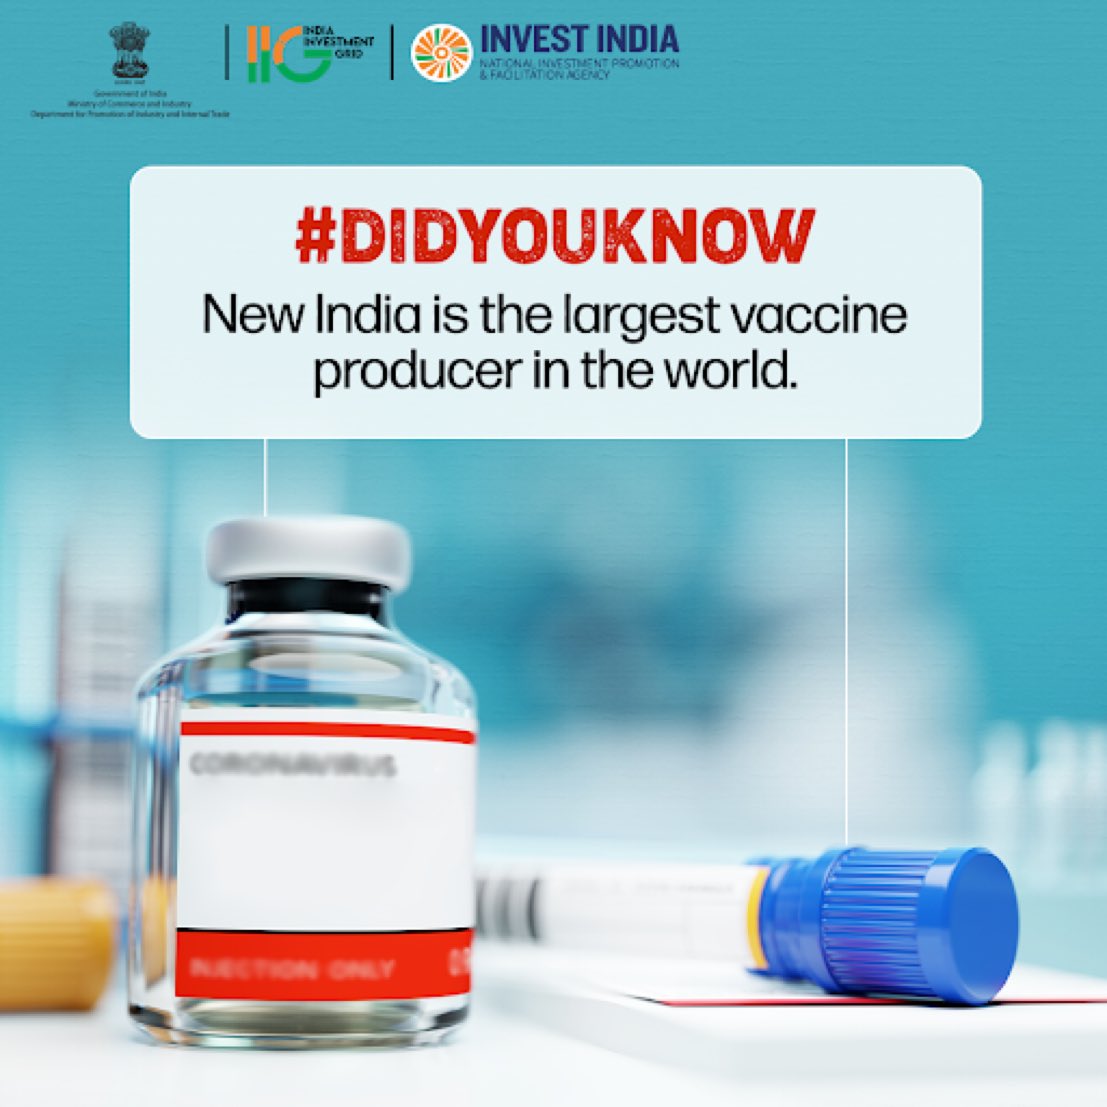 #GrowWithIndia
60% of the world’s vaccines and 20% of generic medicines come from #NewIndia.

Explore opportunities in the sector on #IIG at bit.ly/IIGPharma